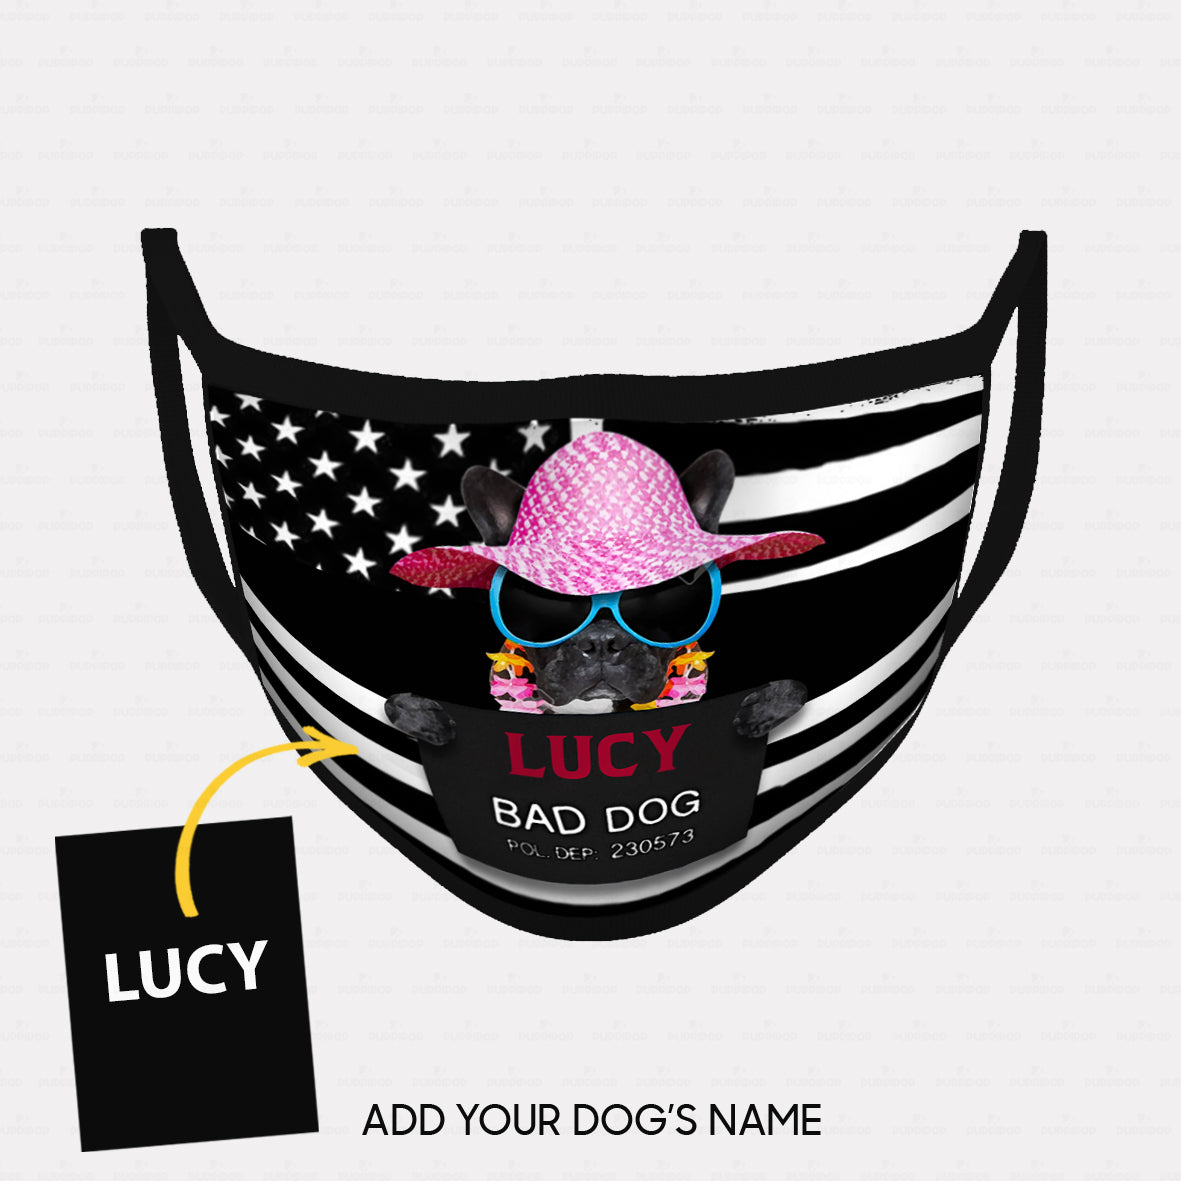 Personalized Dog Gift Idea - Bad Dog Girl Wearing Beach Hat For Dog Lovers - Cloth Mask